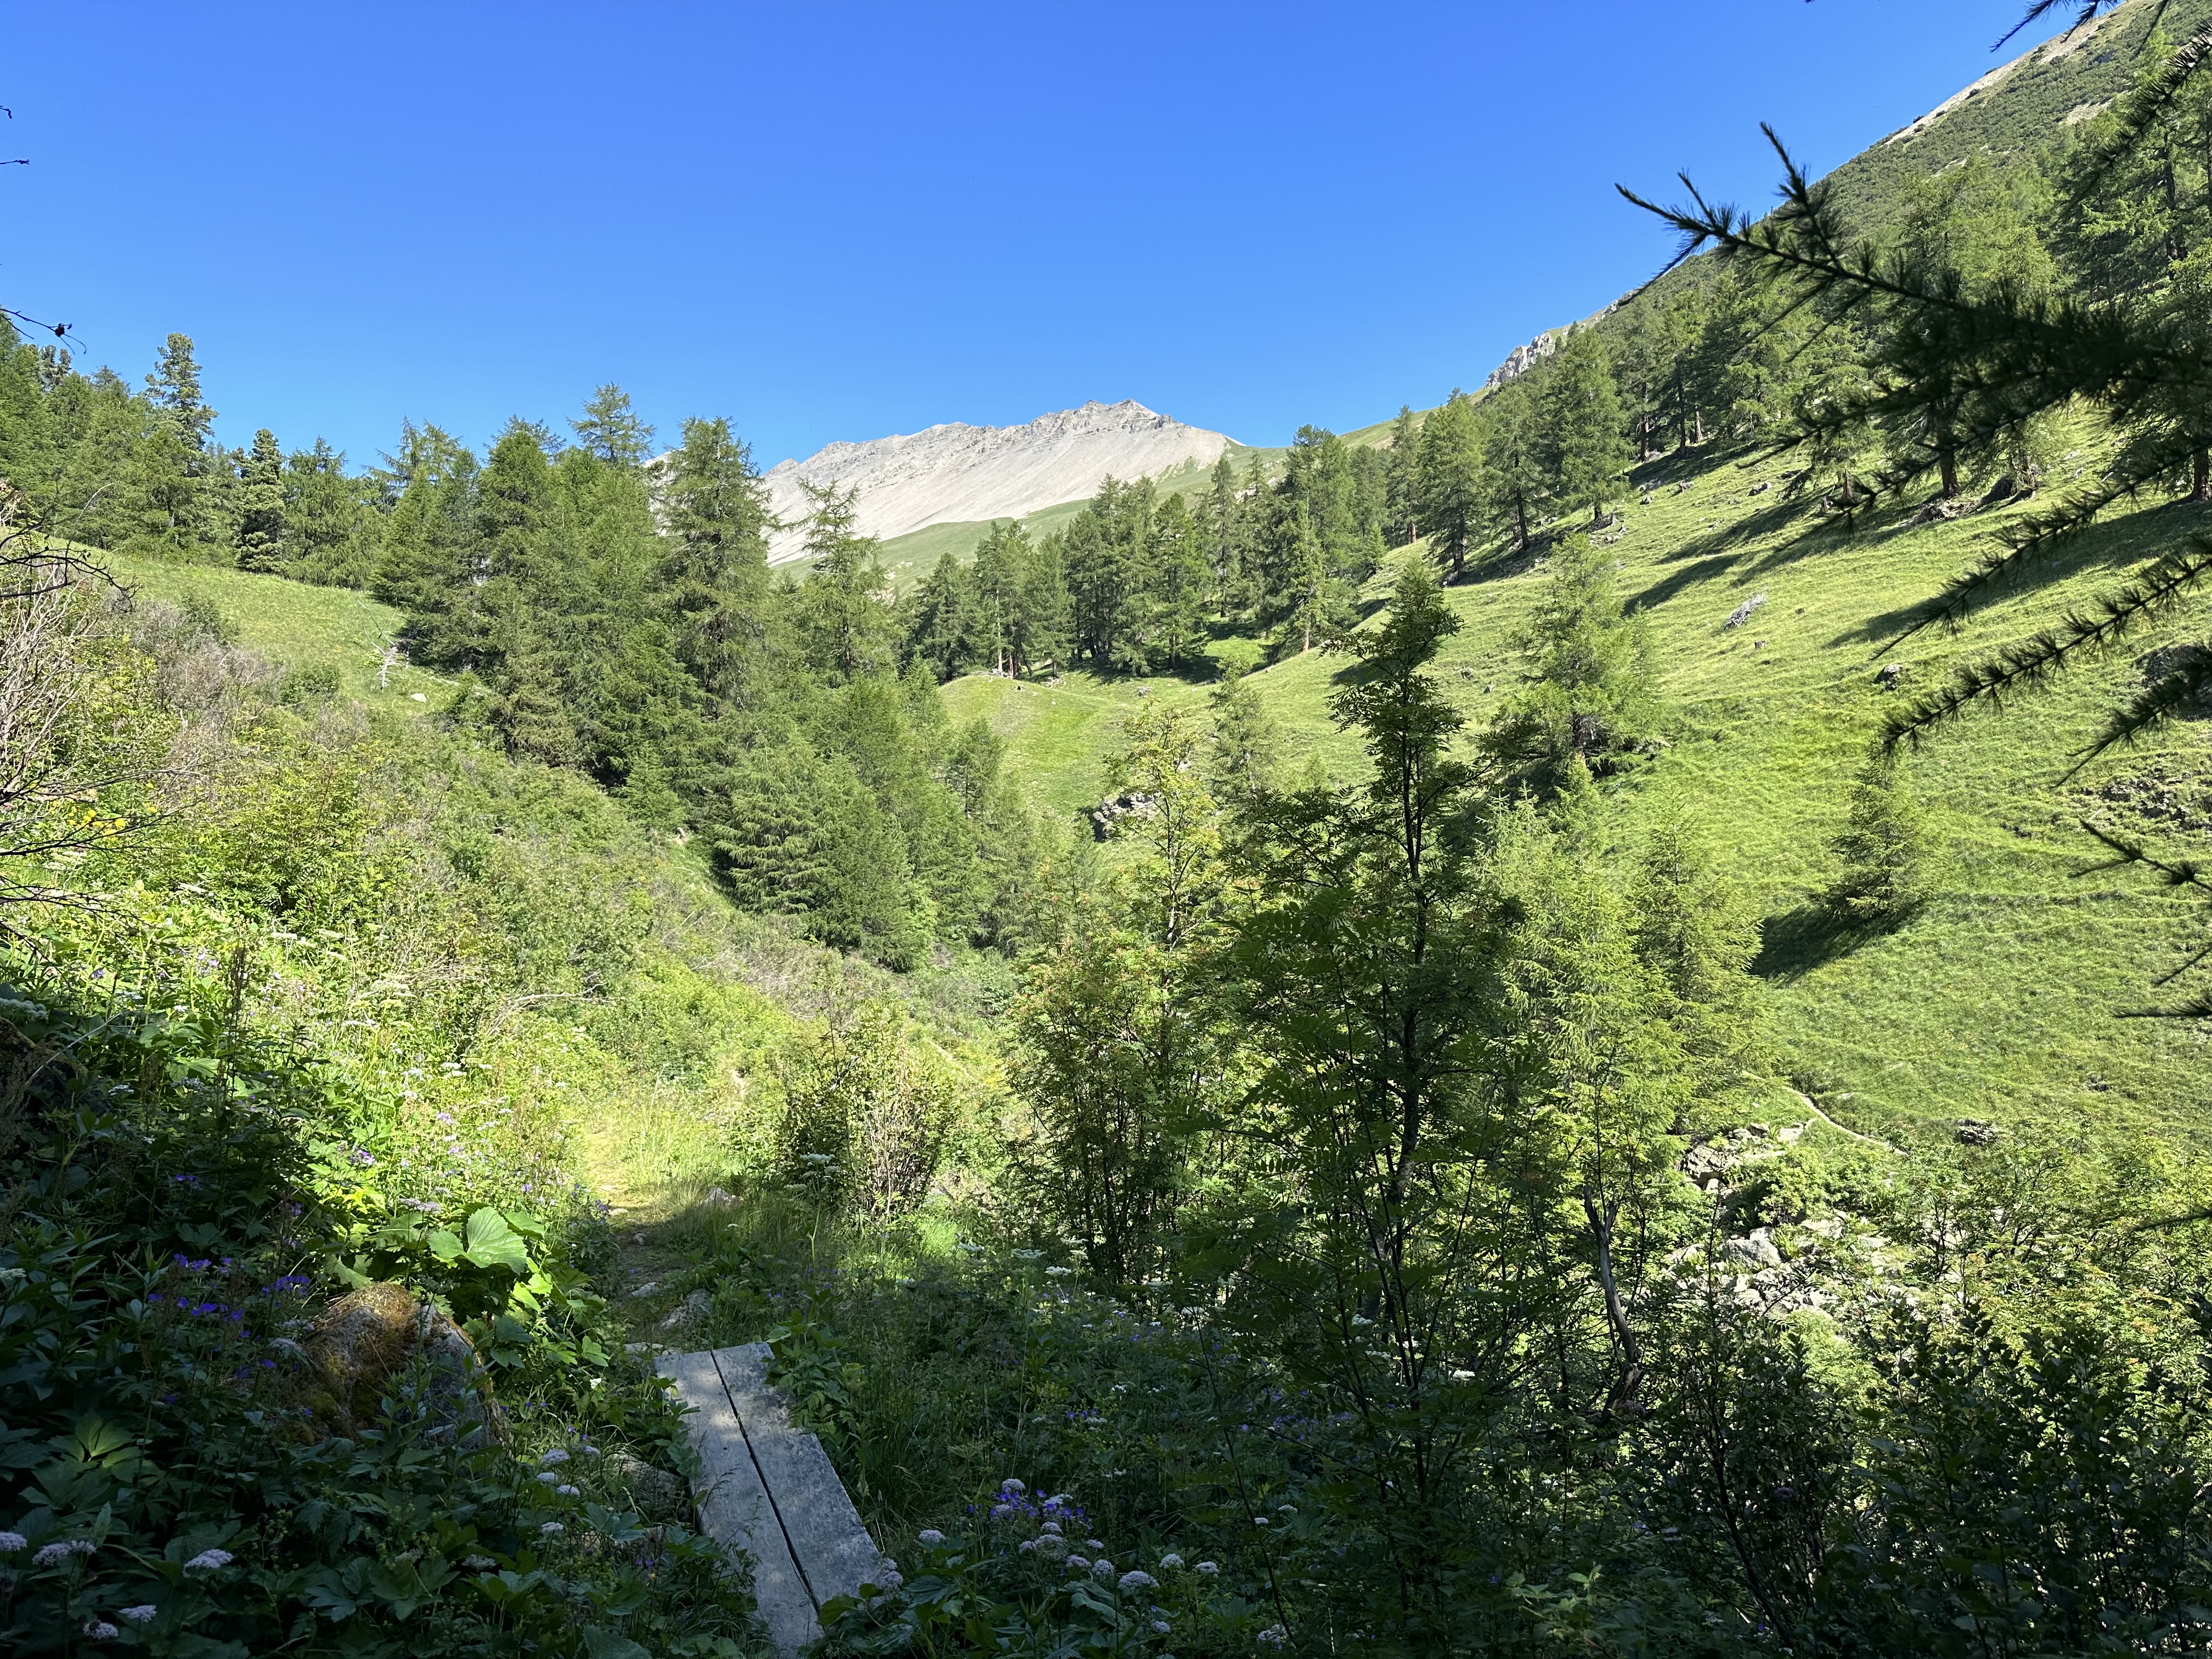 View of alpine mountainside, mixed woods and pasture under a blue sky.